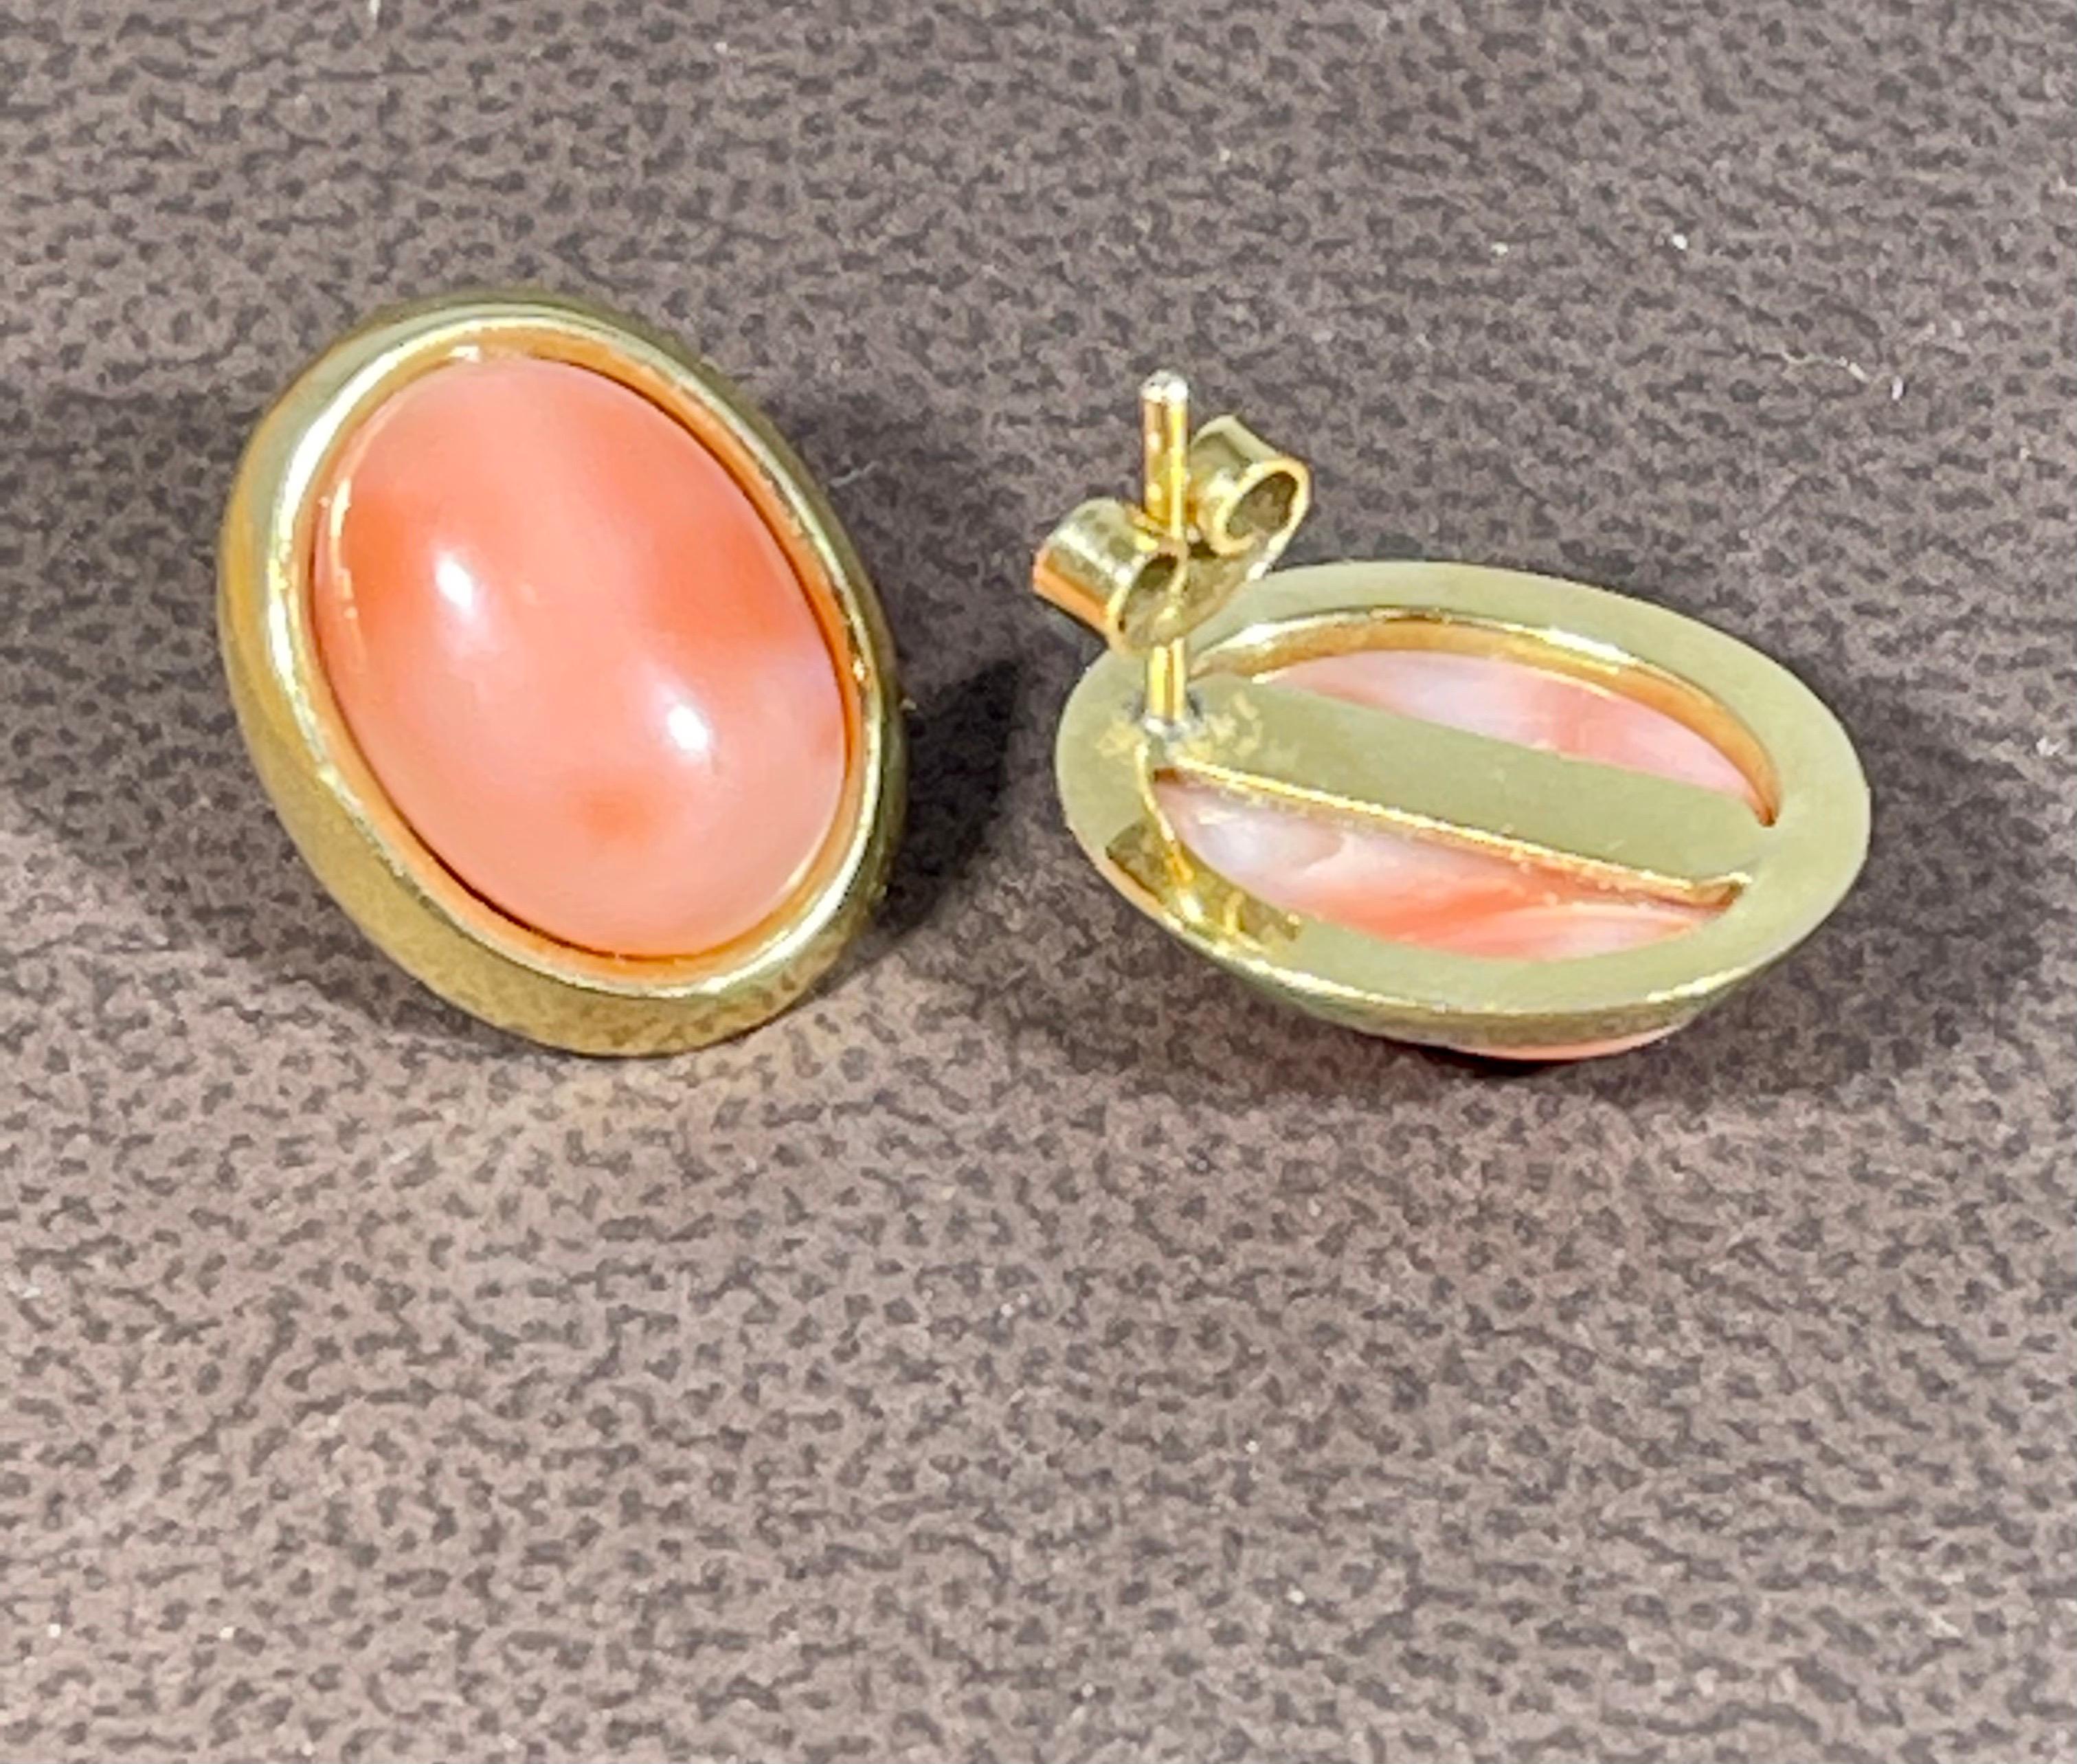 Natural Pink Coral Simple Stud Earring in 14 Karat Yellow Gold 10 X 14 MM
 Coral Natural , Very pretty pink color , Very desirable color and quality. Approximately 10 x 14 mm
perfect pair made in 14 Karat yellow gold. Natural coral of this size are